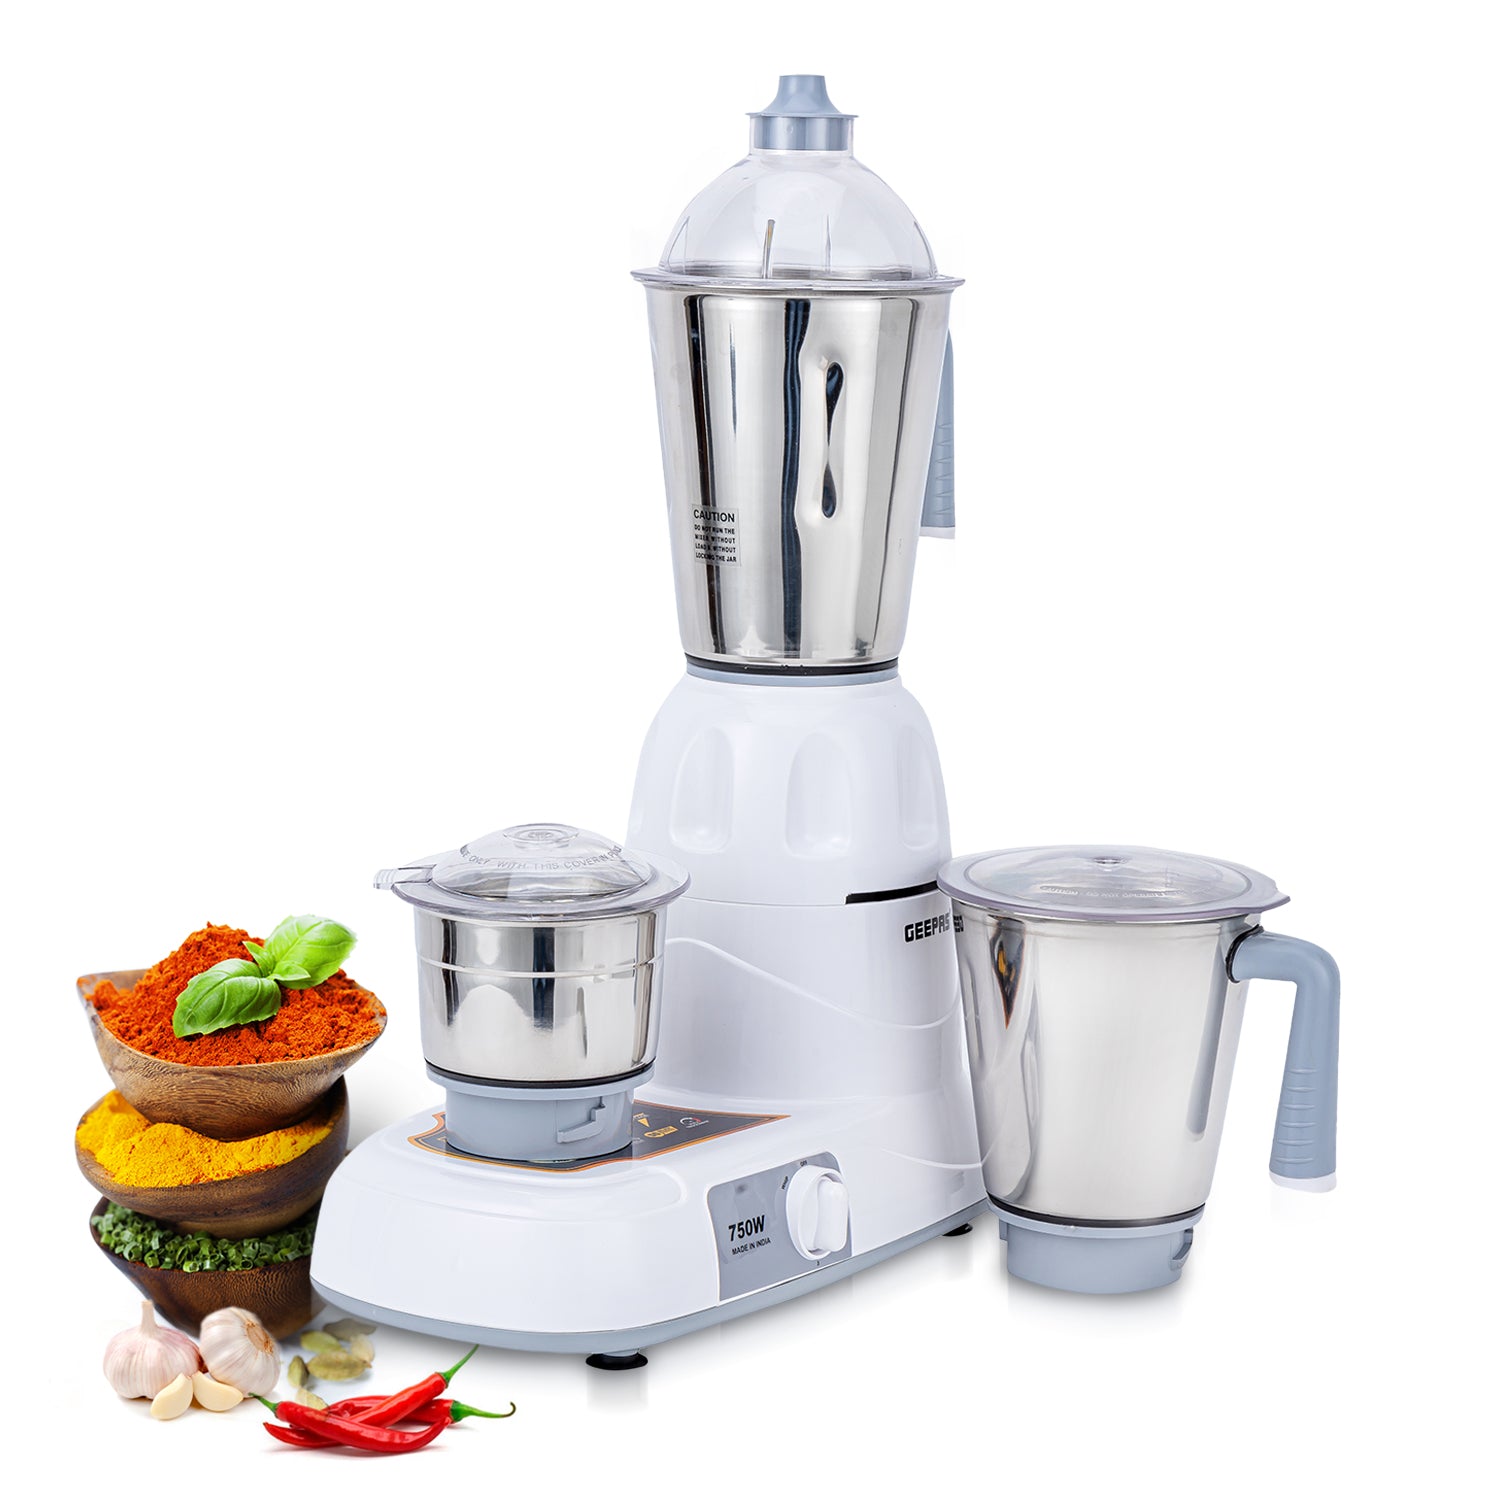 Indian Mixer Wet and Dry Grinder - Versatile Blender For Spice Mixing